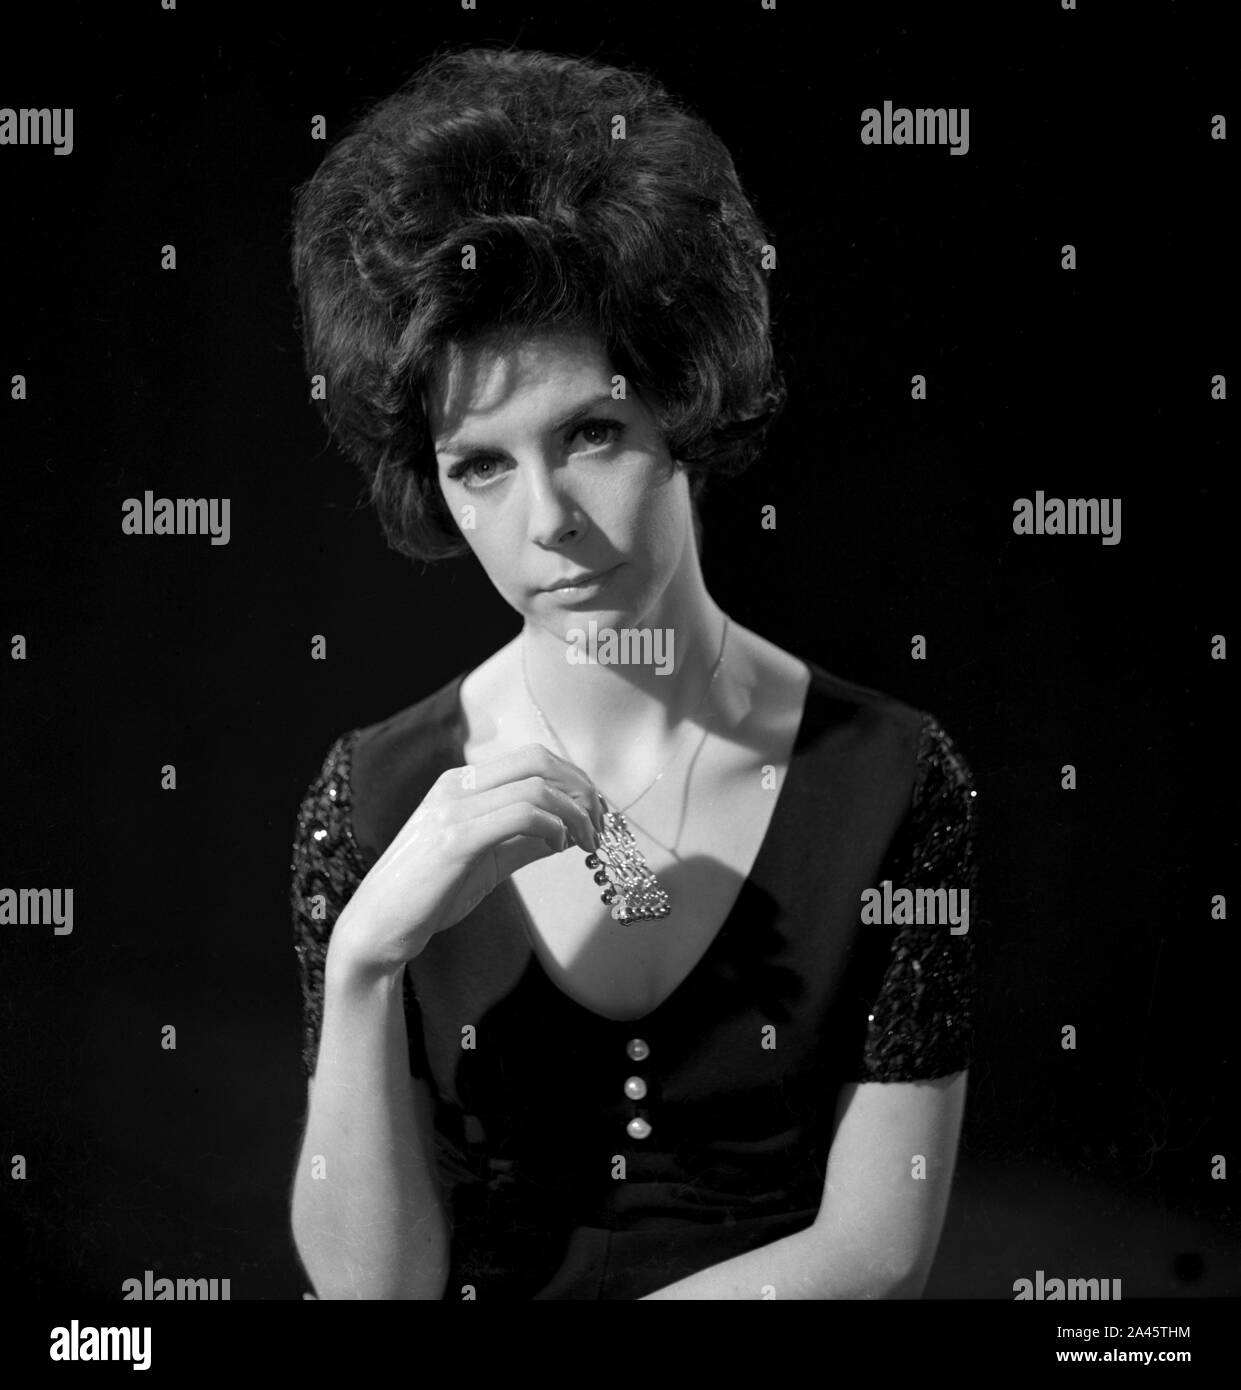 1960's photoshoot Female Model Thoughtful pose by model with bouffant hair with a moody black background. c1968  Photo by Tony Henshaw Archive Stock Photo